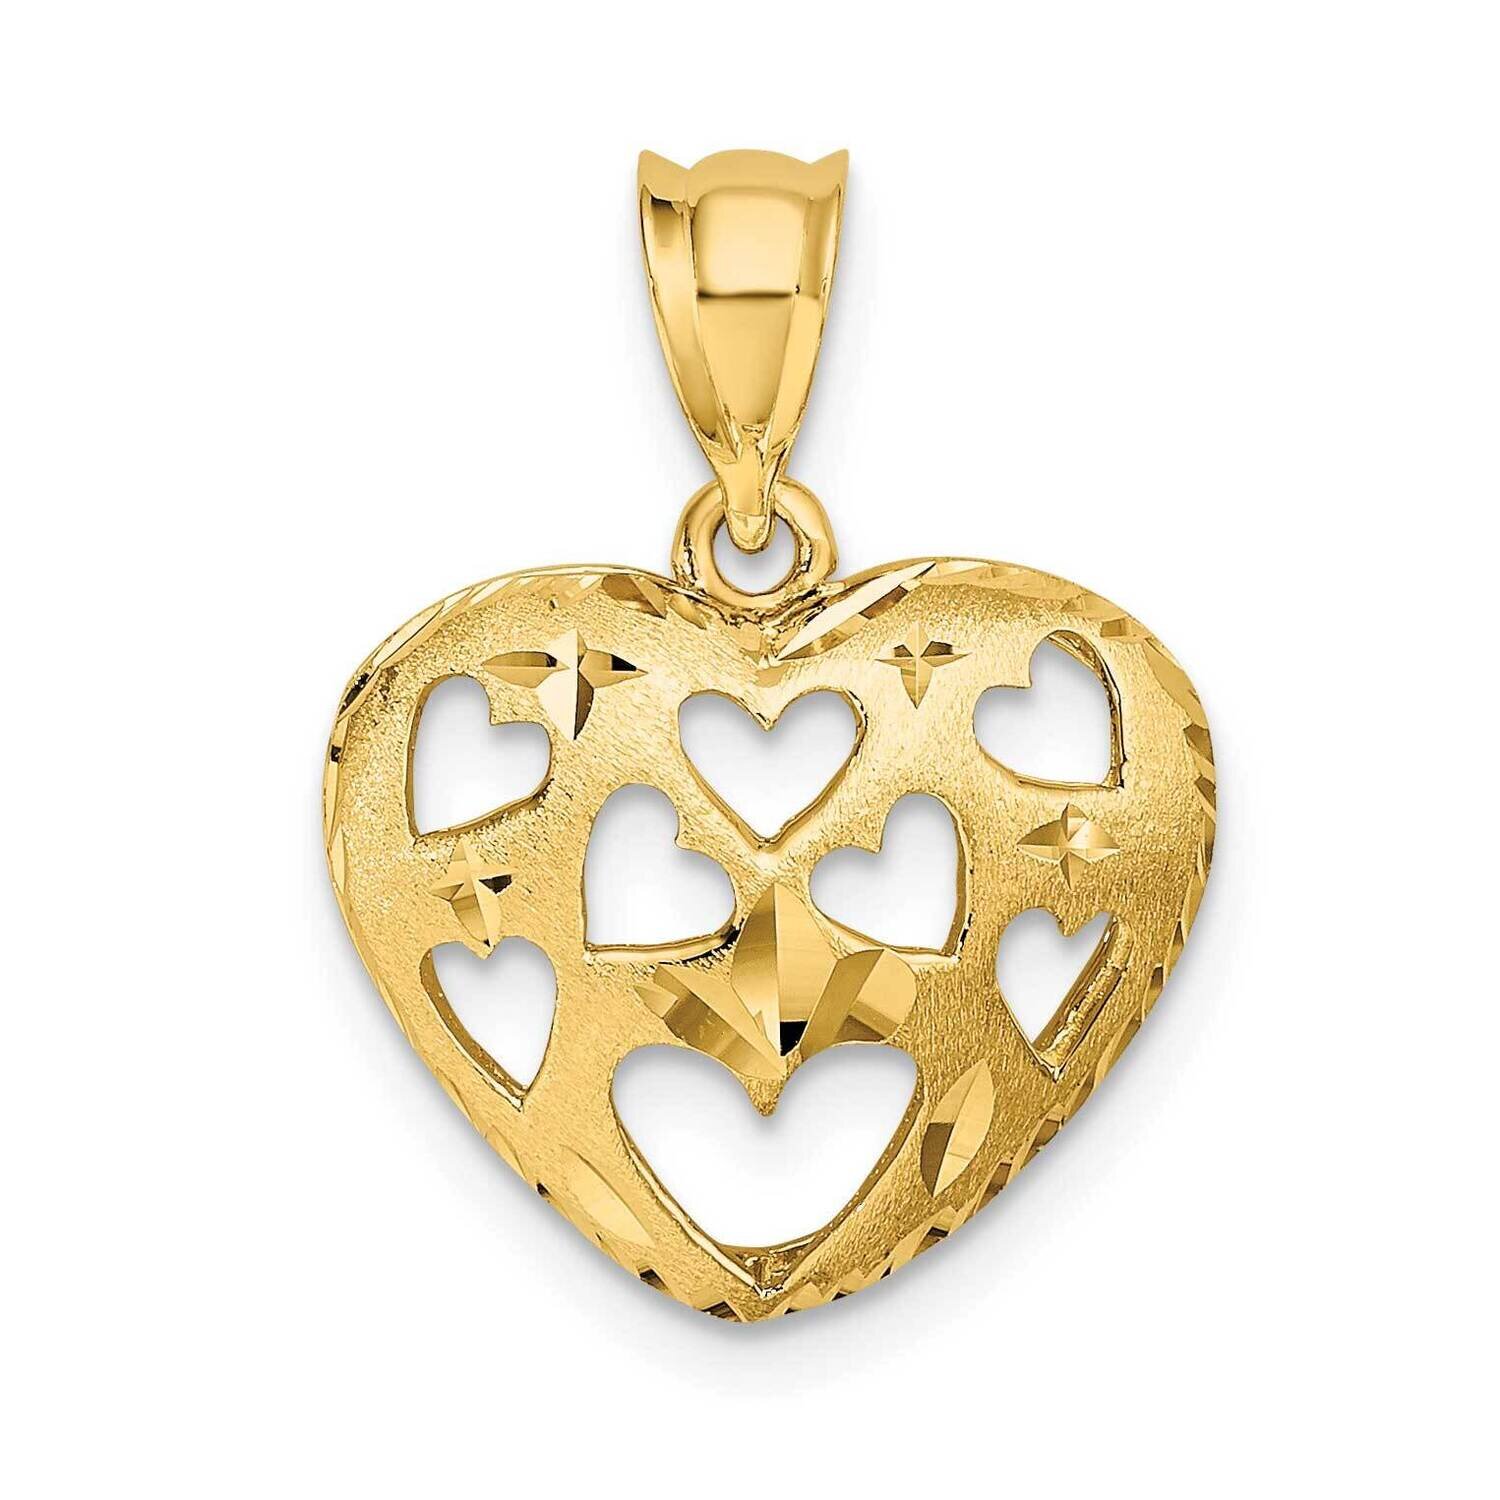 Hearts On Heart Charm 14k Gold Cut-out D3833